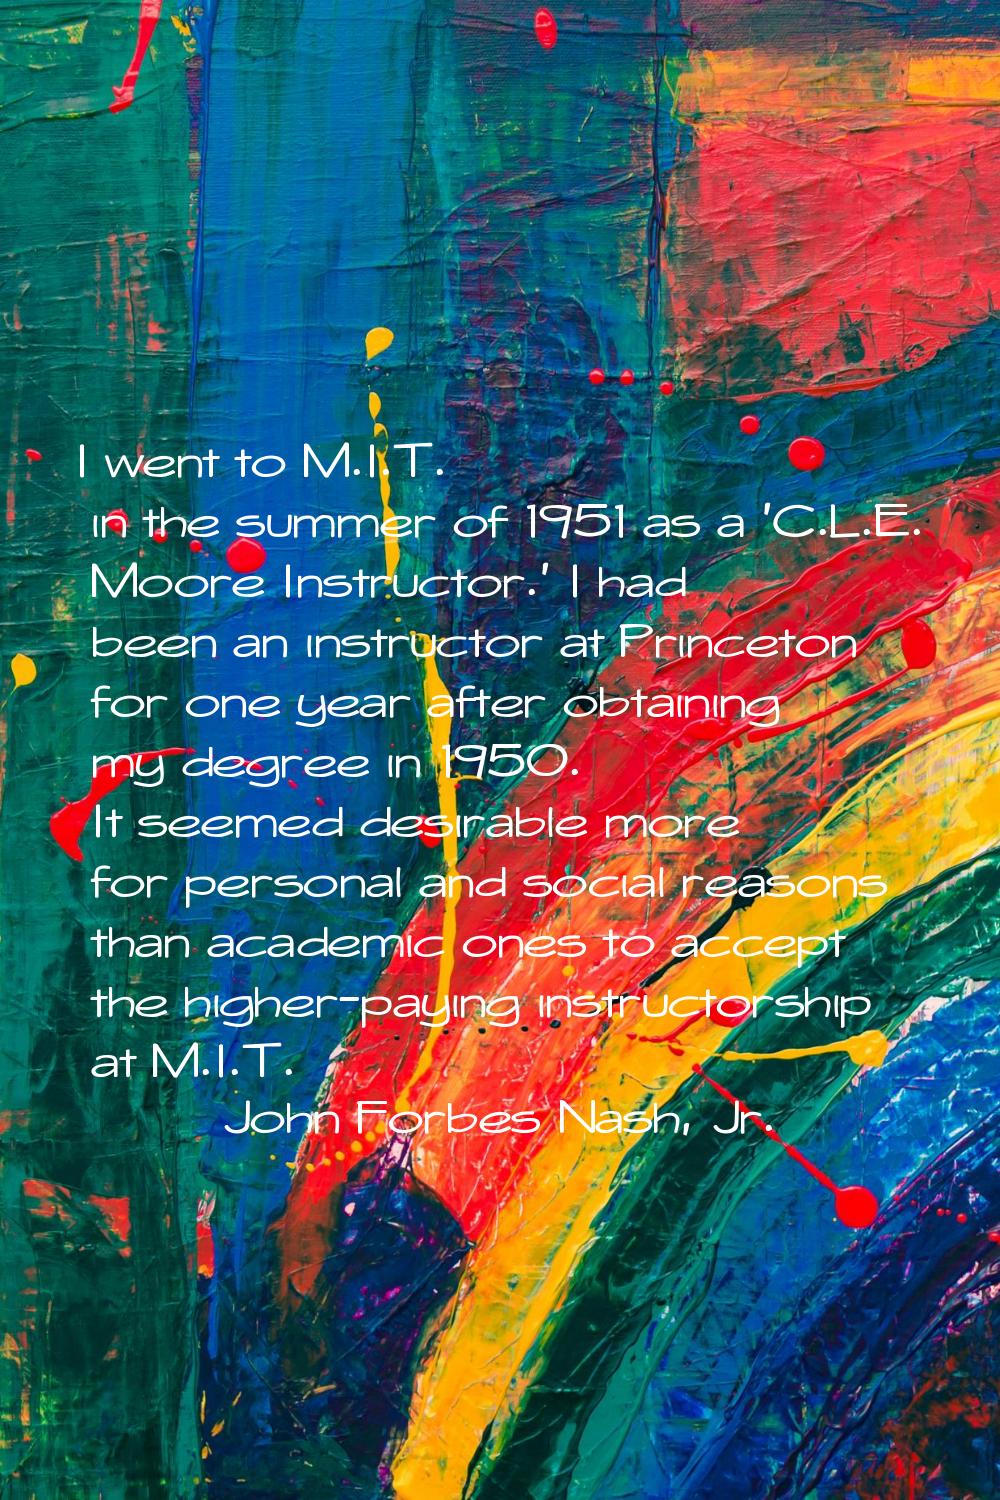 I went to M.I.T. in the summer of 1951 as a 'C.L.E. Moore Instructor.' I had been an instructor at 